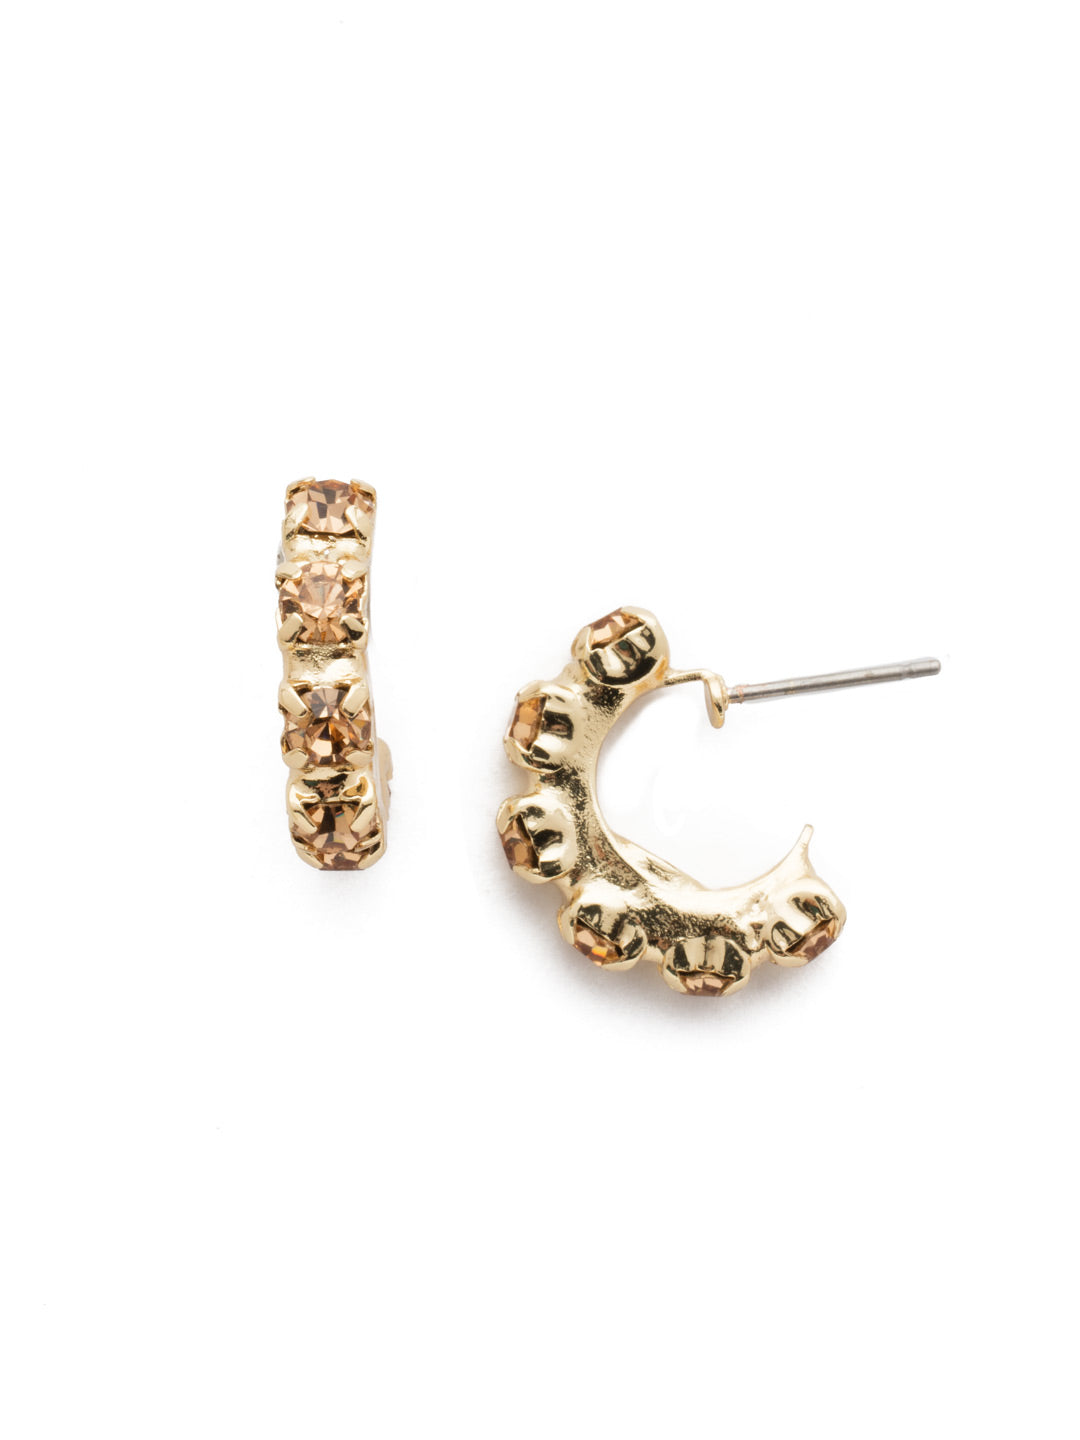 Maisie Hoop Earring - EEF49BGLC - <p>These eye-catching diamond encrusted hoops are sure to elevate any look. Pair these hoops with a blazer or a party dress to effortlessly complement any look. From Sorrelli's Light Colorado collection in our Bright Gold-tone finish.</p>